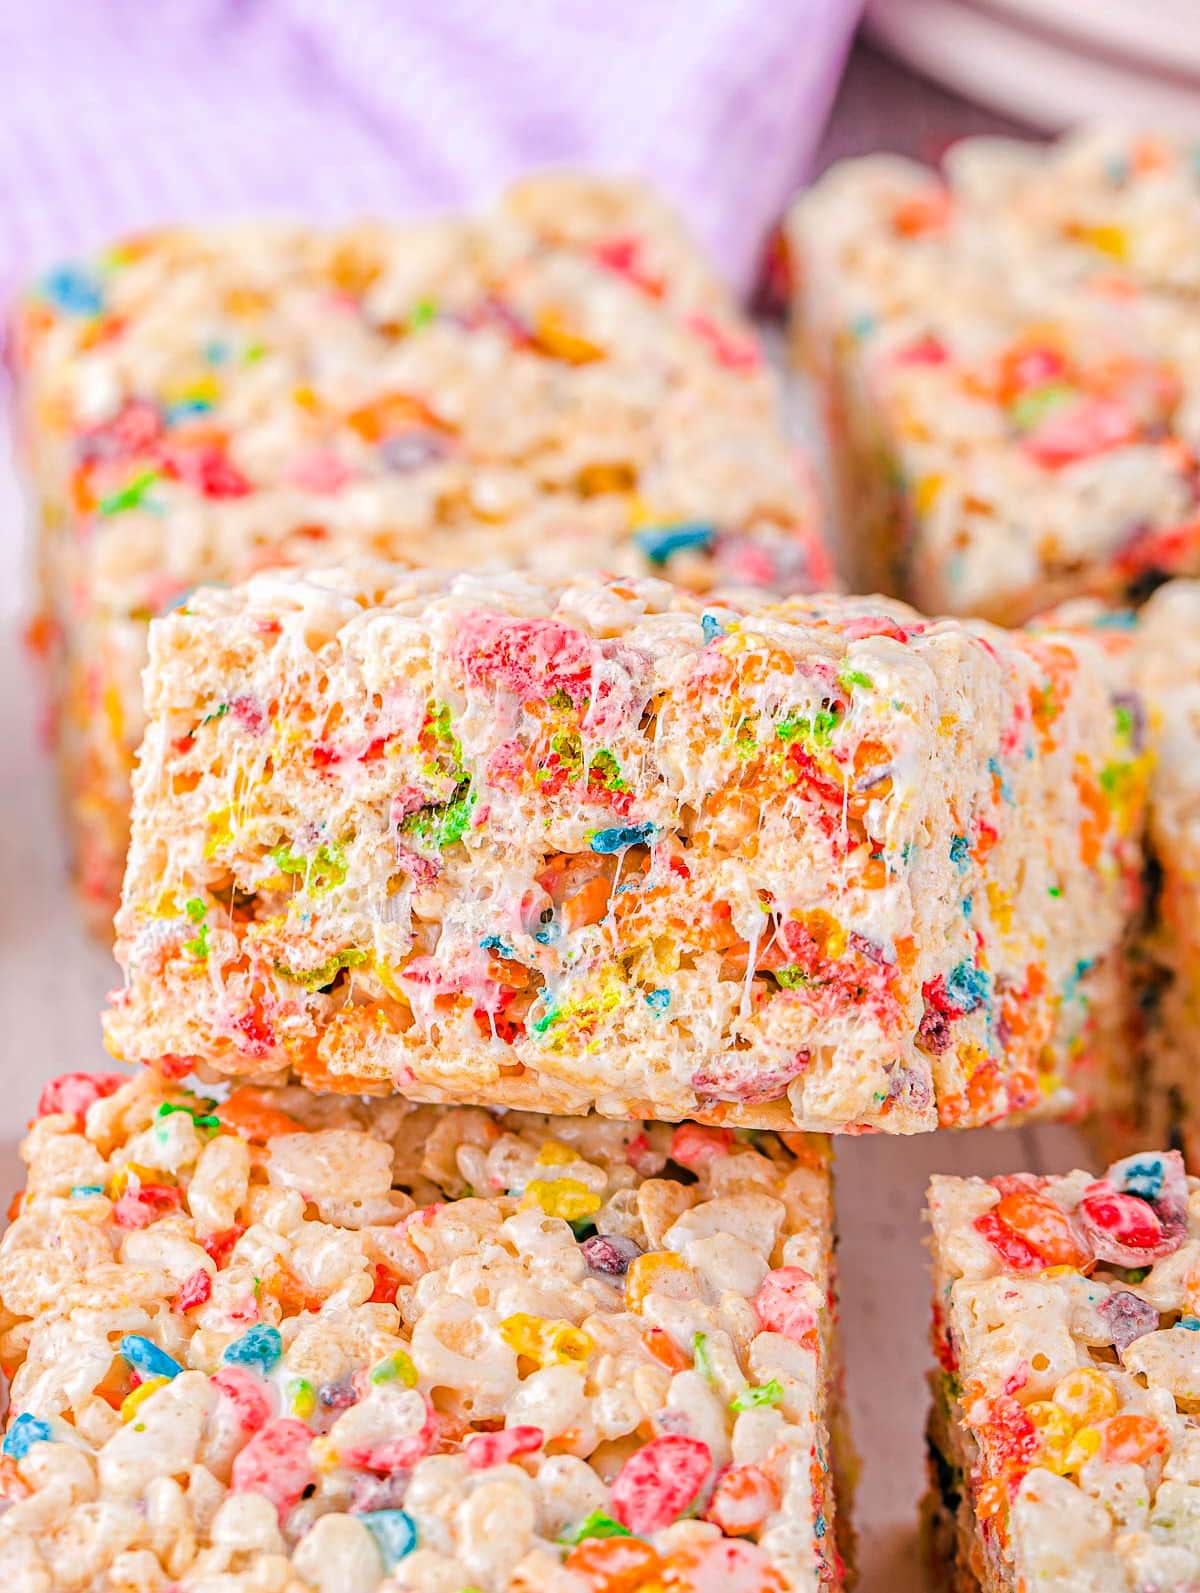 How to Make Colored Rice Krispie Treats - The Savvy Sparrow